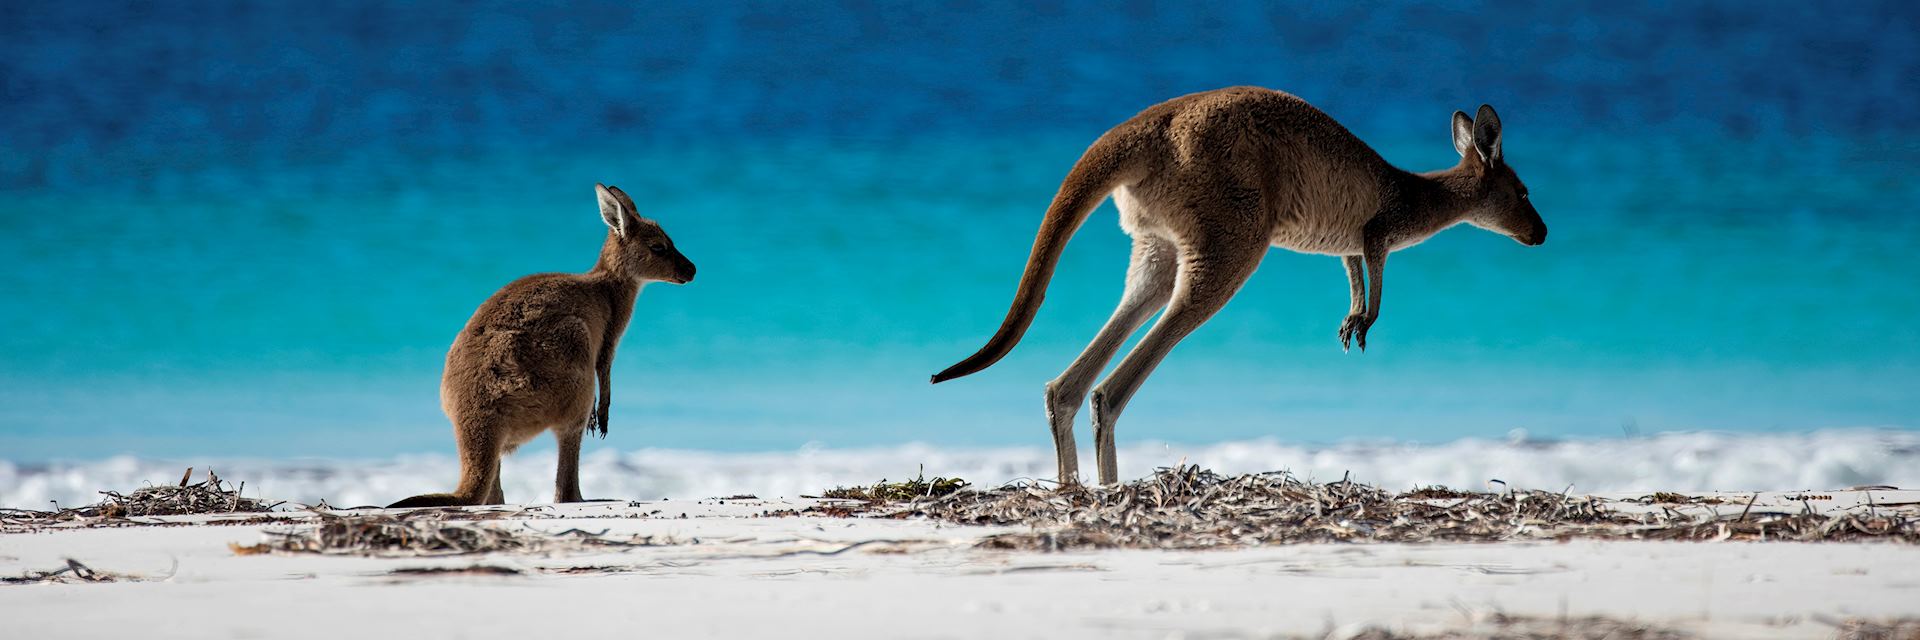 Kangaroos in Cape Le Grand National Park